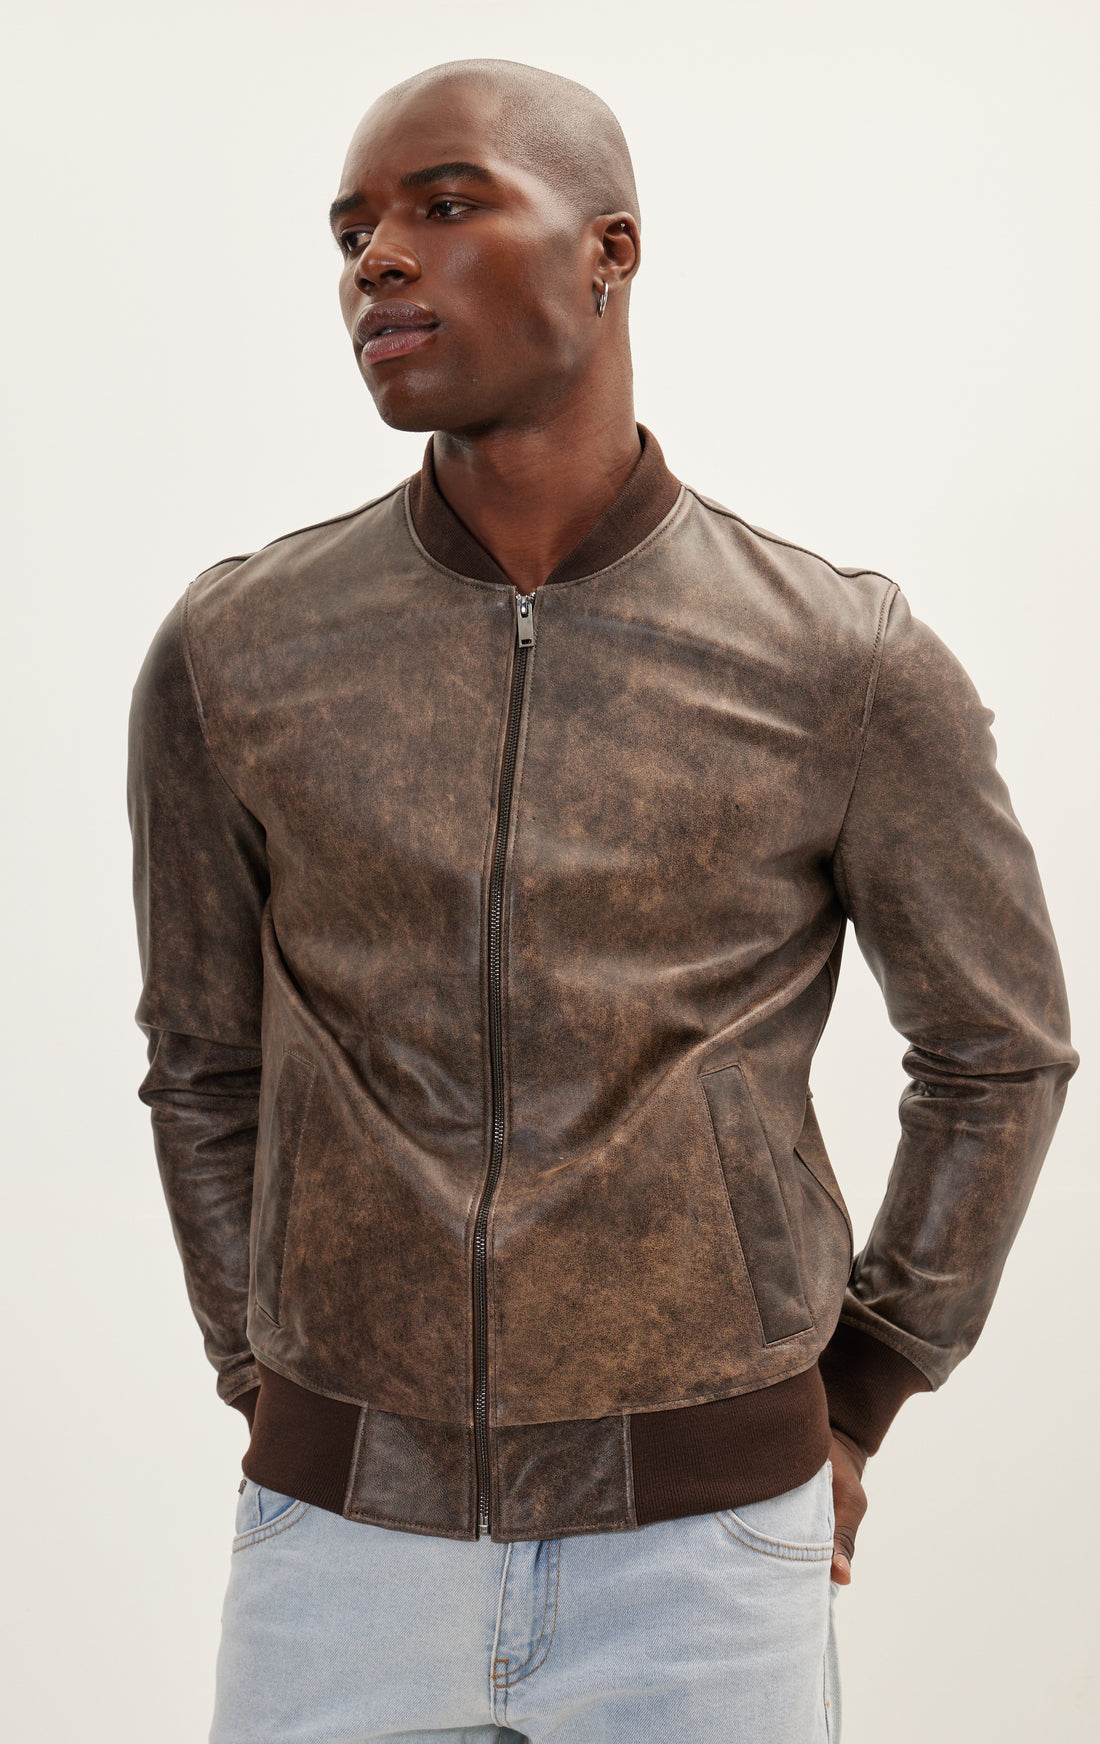 N° 71461 - LEATHER BOMBER - BROWN